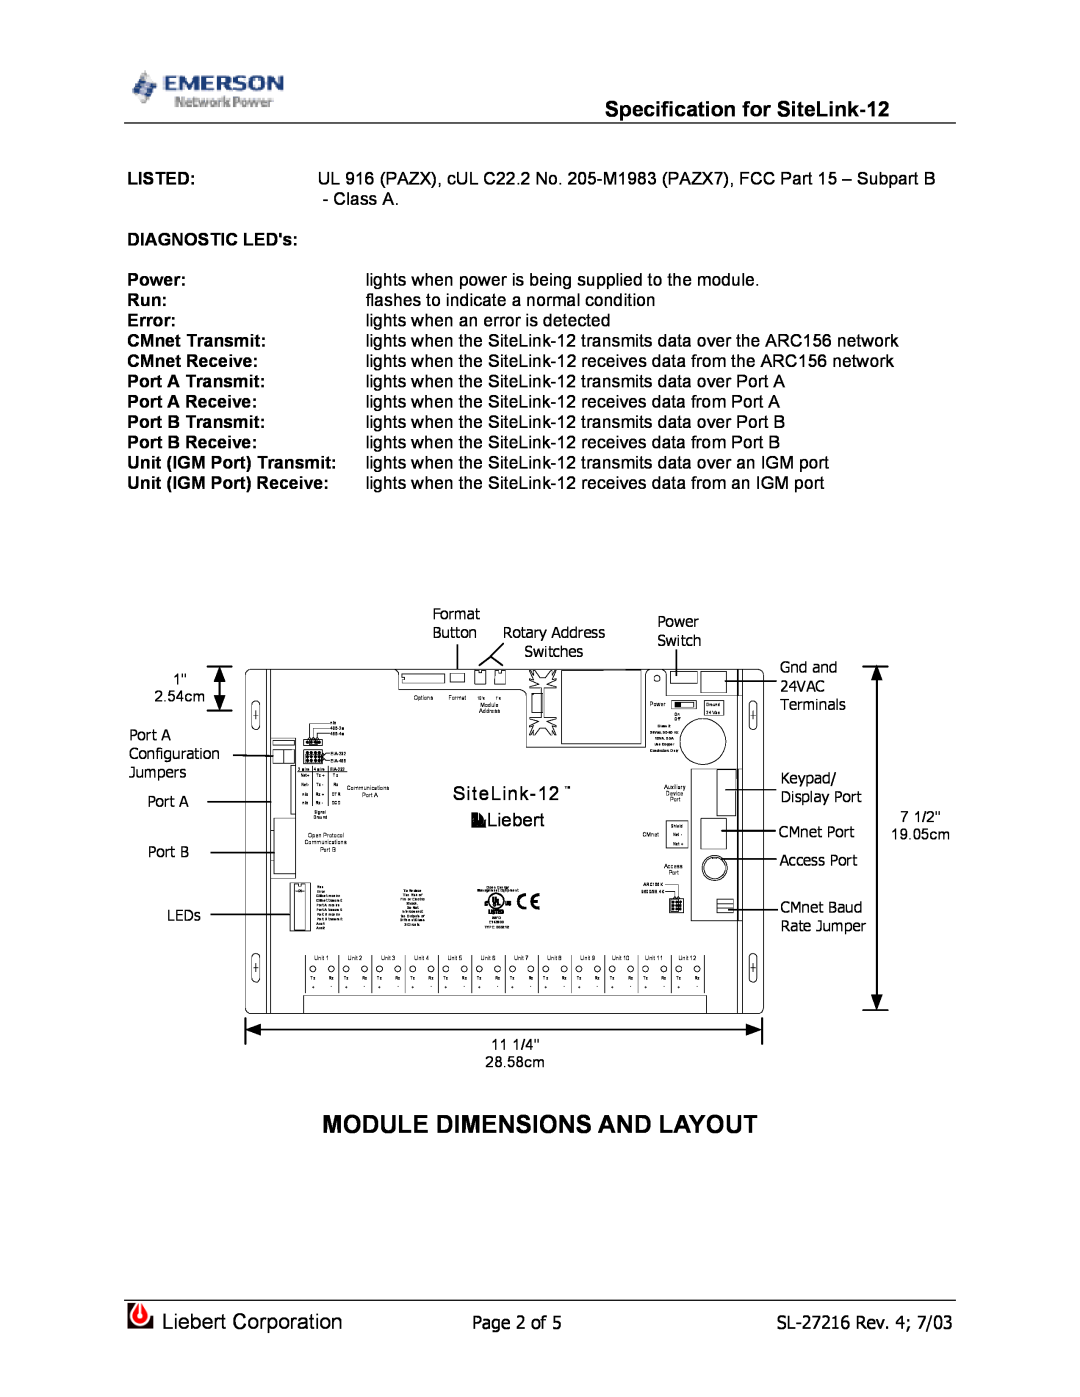 Emerson dimensions Module Dimensions And Layout, Specification for SiteLink-12, Liebert Corporation 